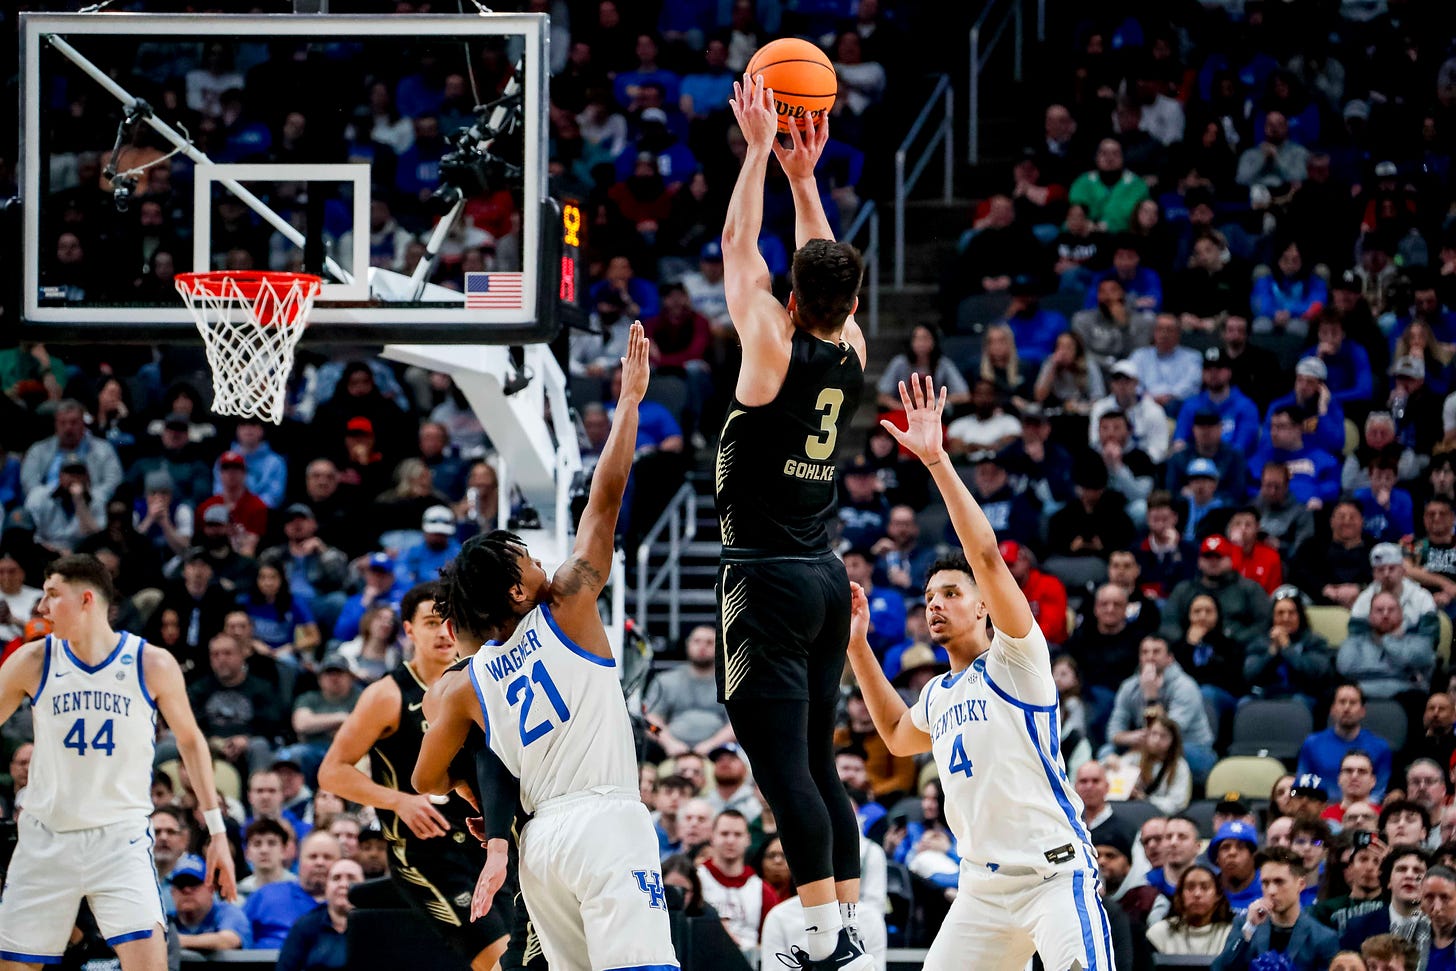 Gohlke puts Oakland on the map as Kentucky's March woes continue | NCAA.com